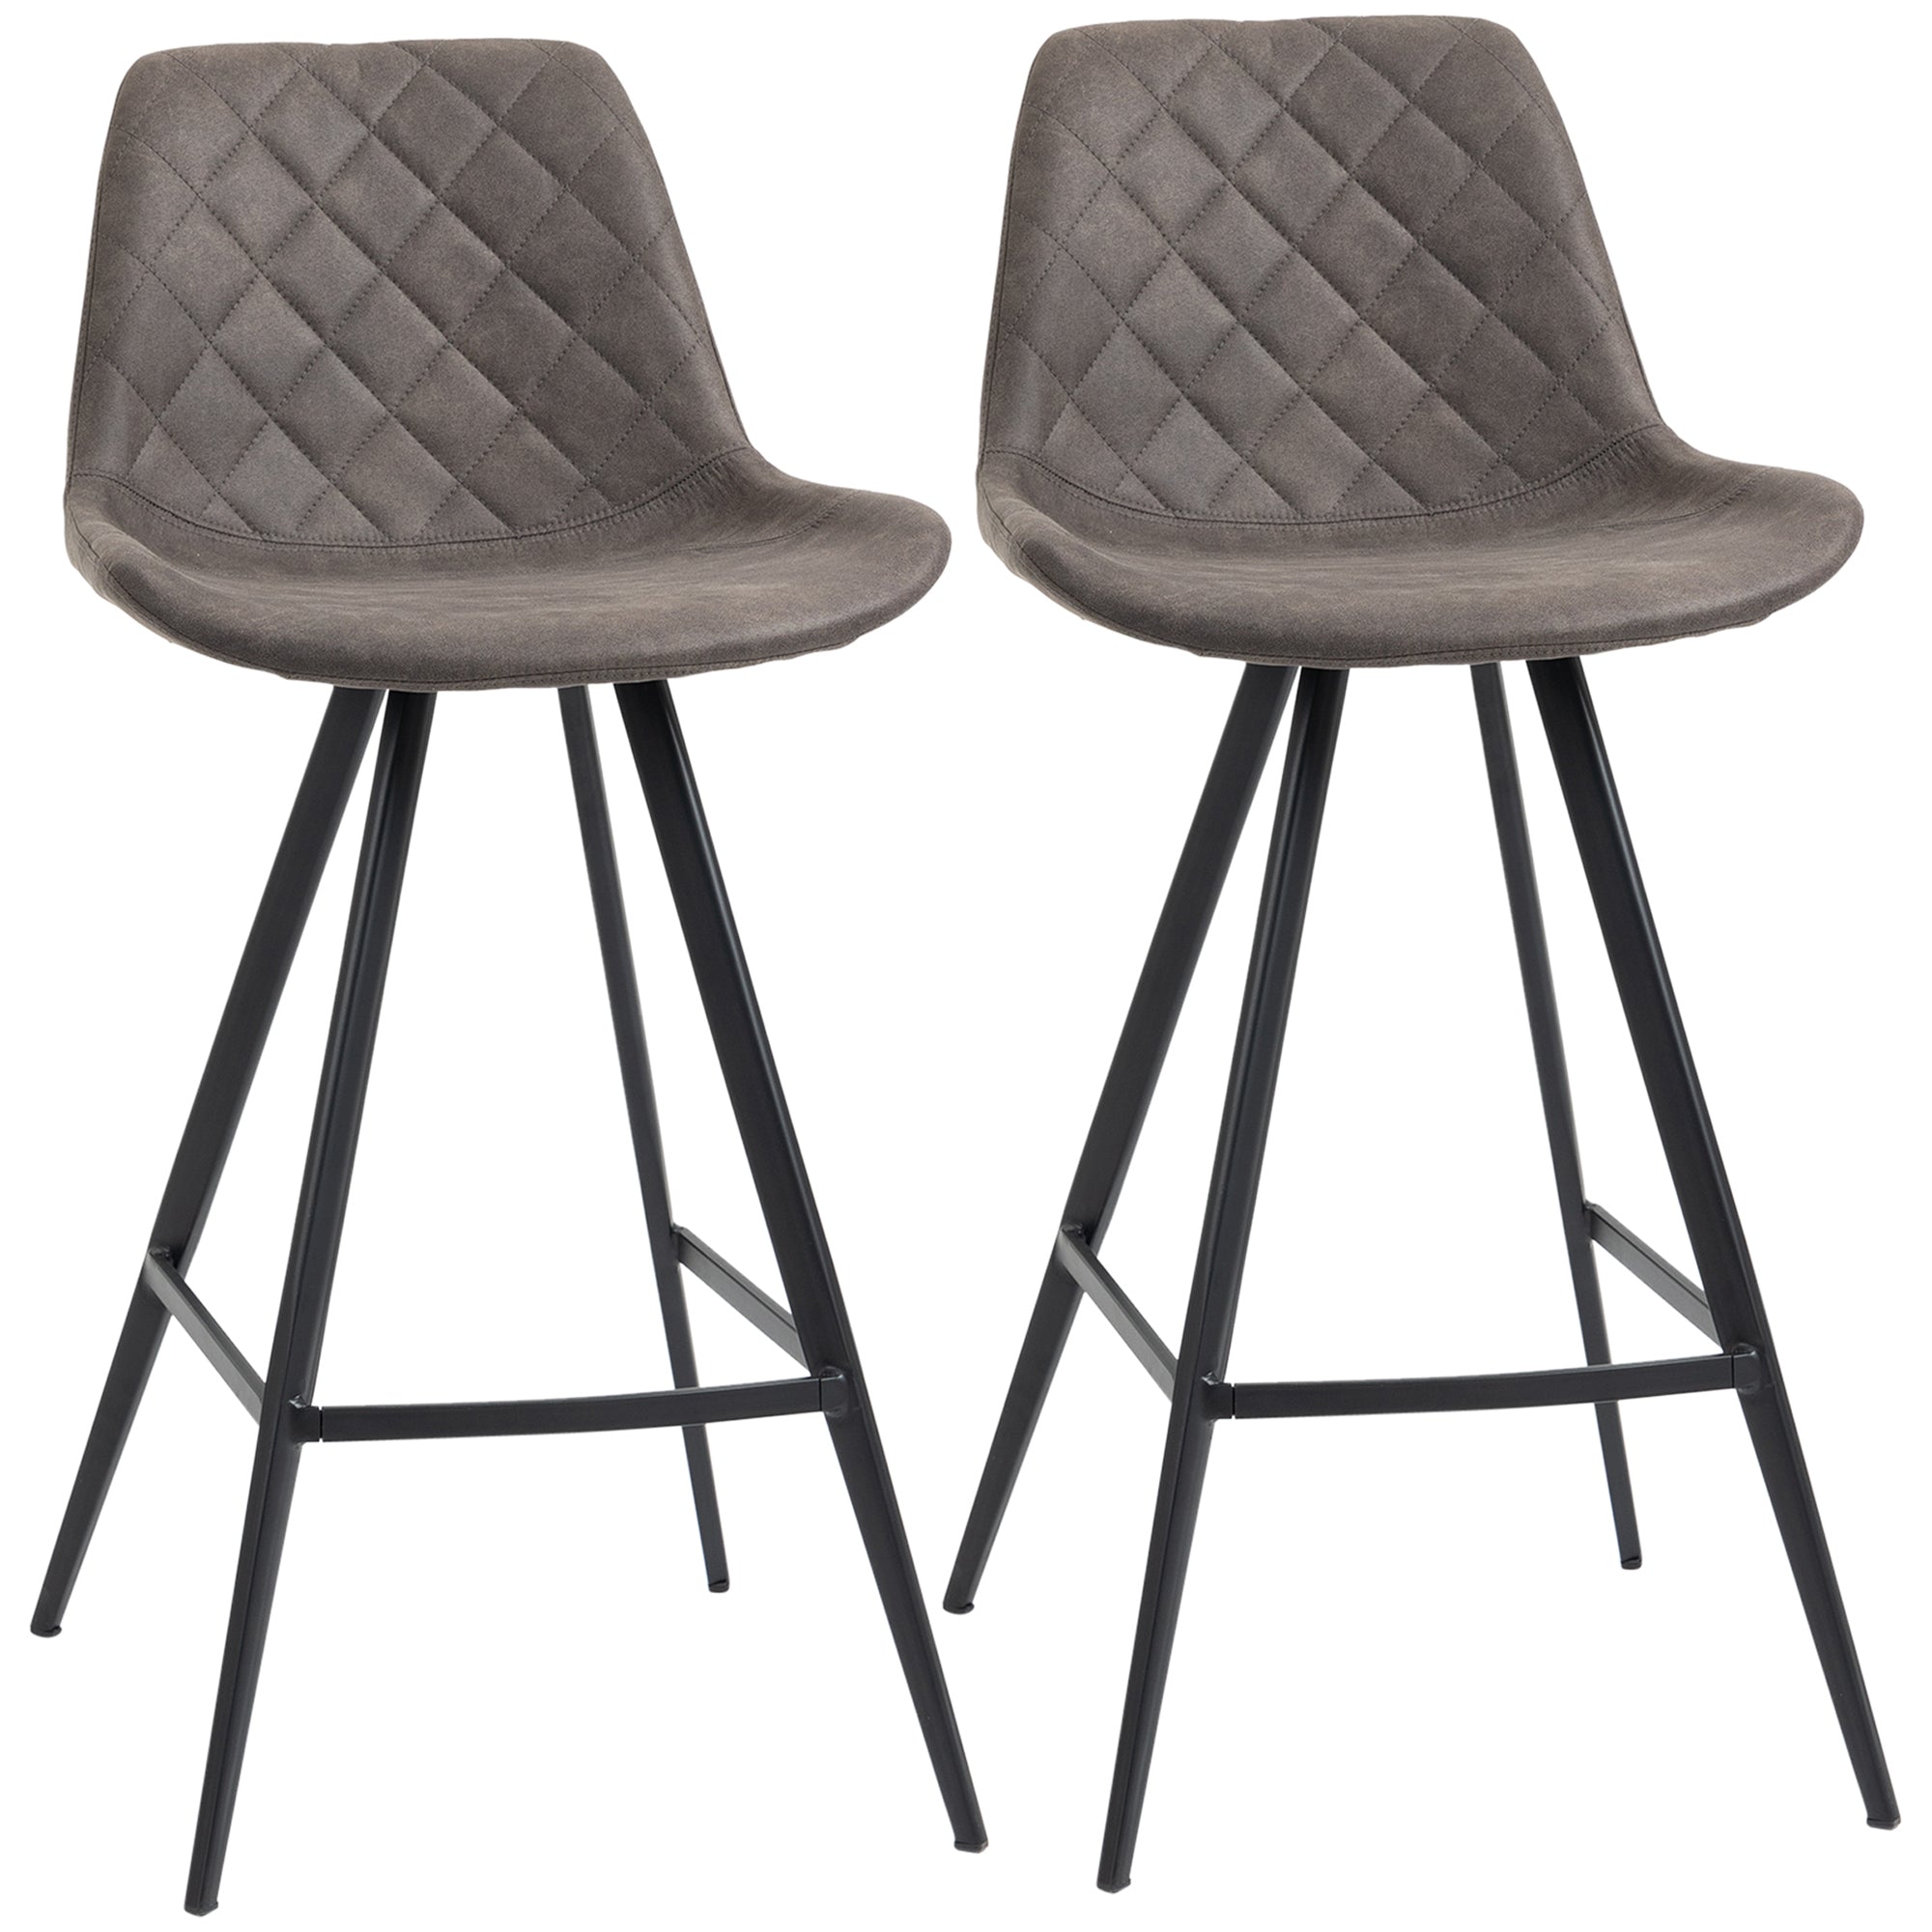 Set Of 2 Bar Stools Vintage Microfiber Cloth Tub Seats Padded Comfortable Steel Frame Footrest Quilted Home Kitchen Chair Stylish Dark Grey-0